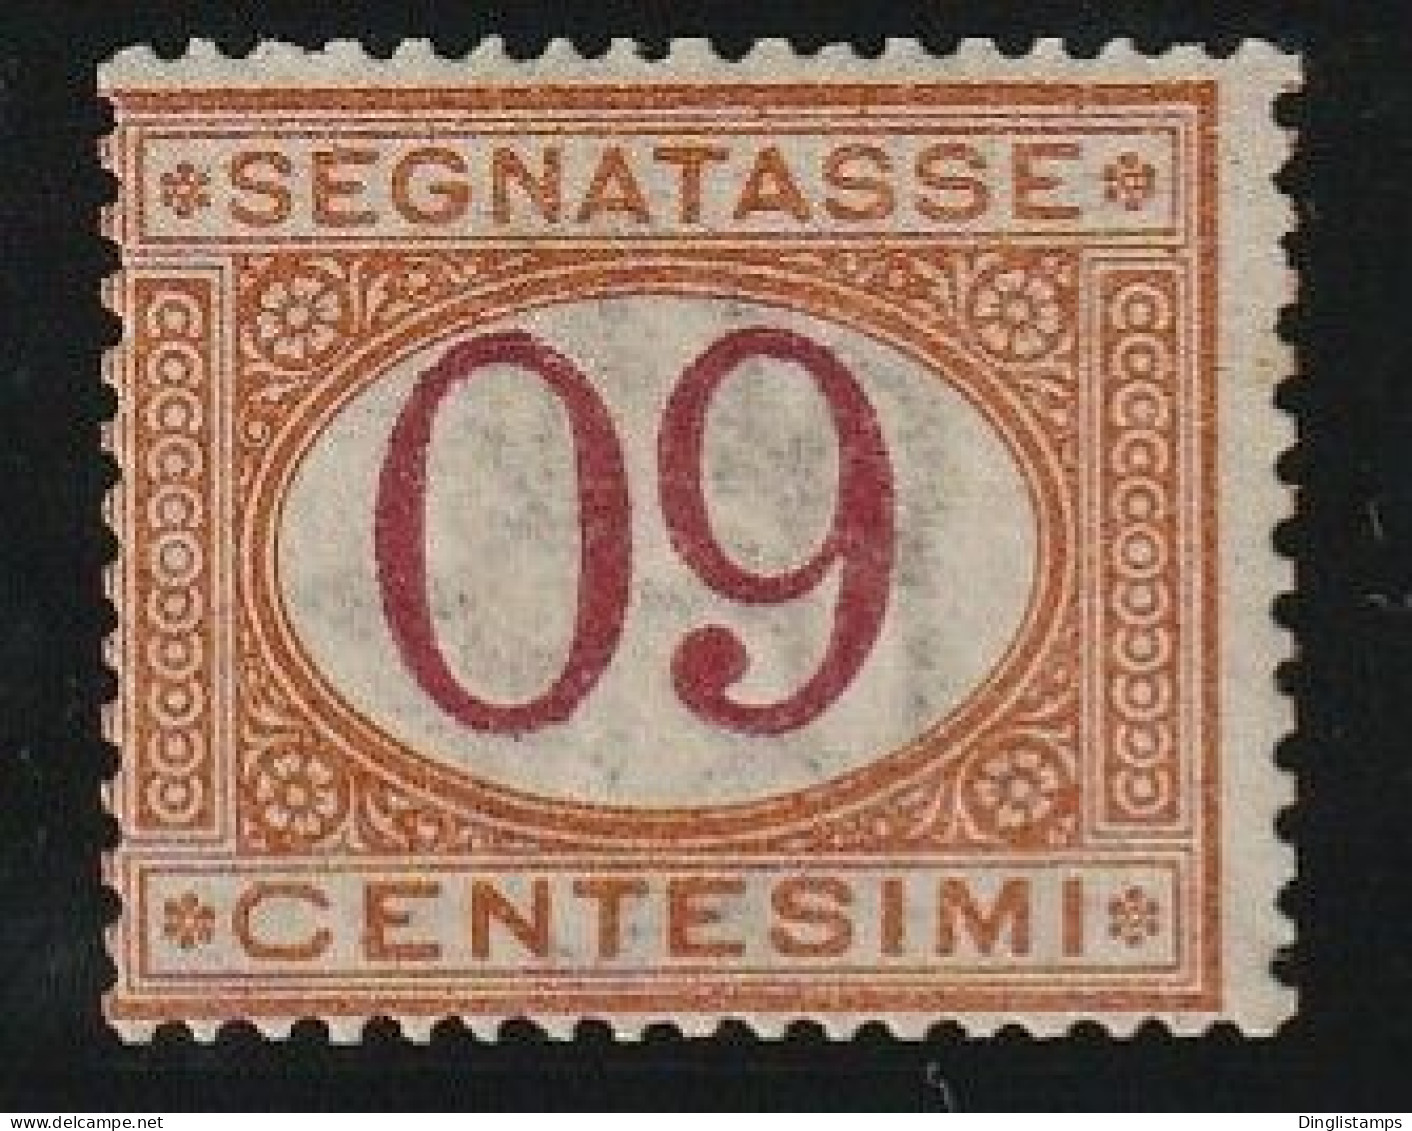 ITALY - 1890 6c Inverted - Postage Due